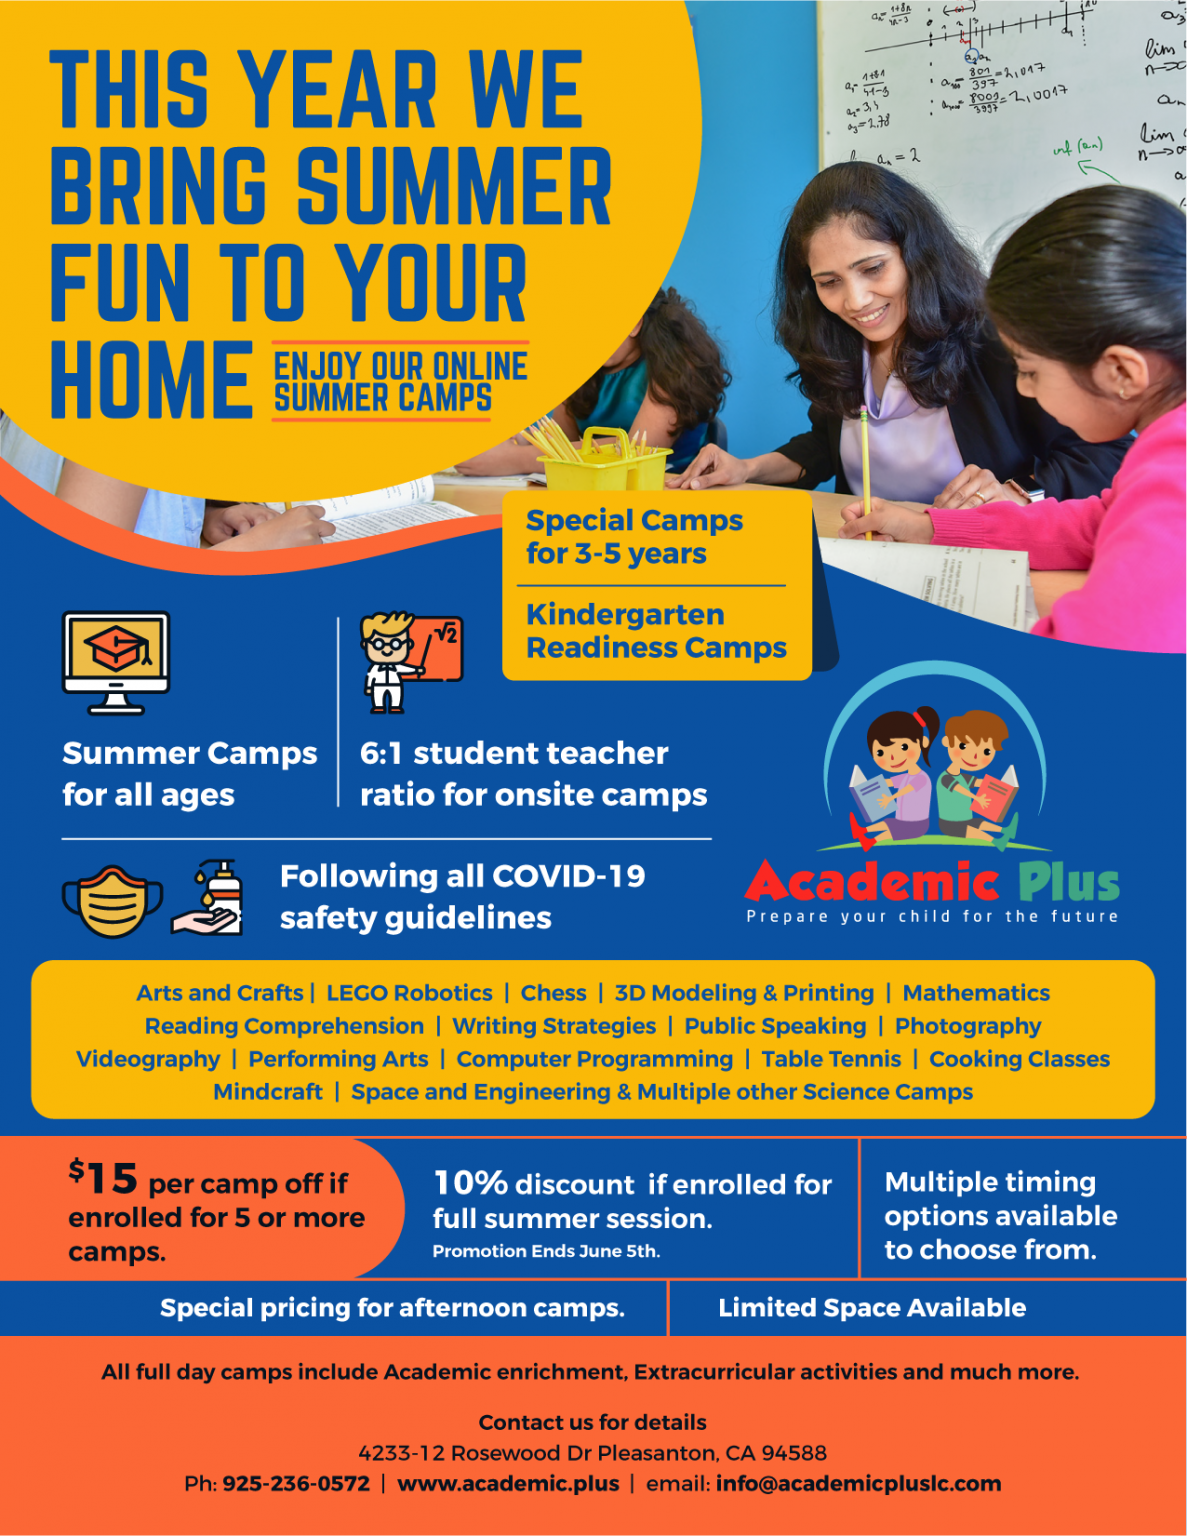 Summer Camps Online and Onsite at Academic Plus Connecting people